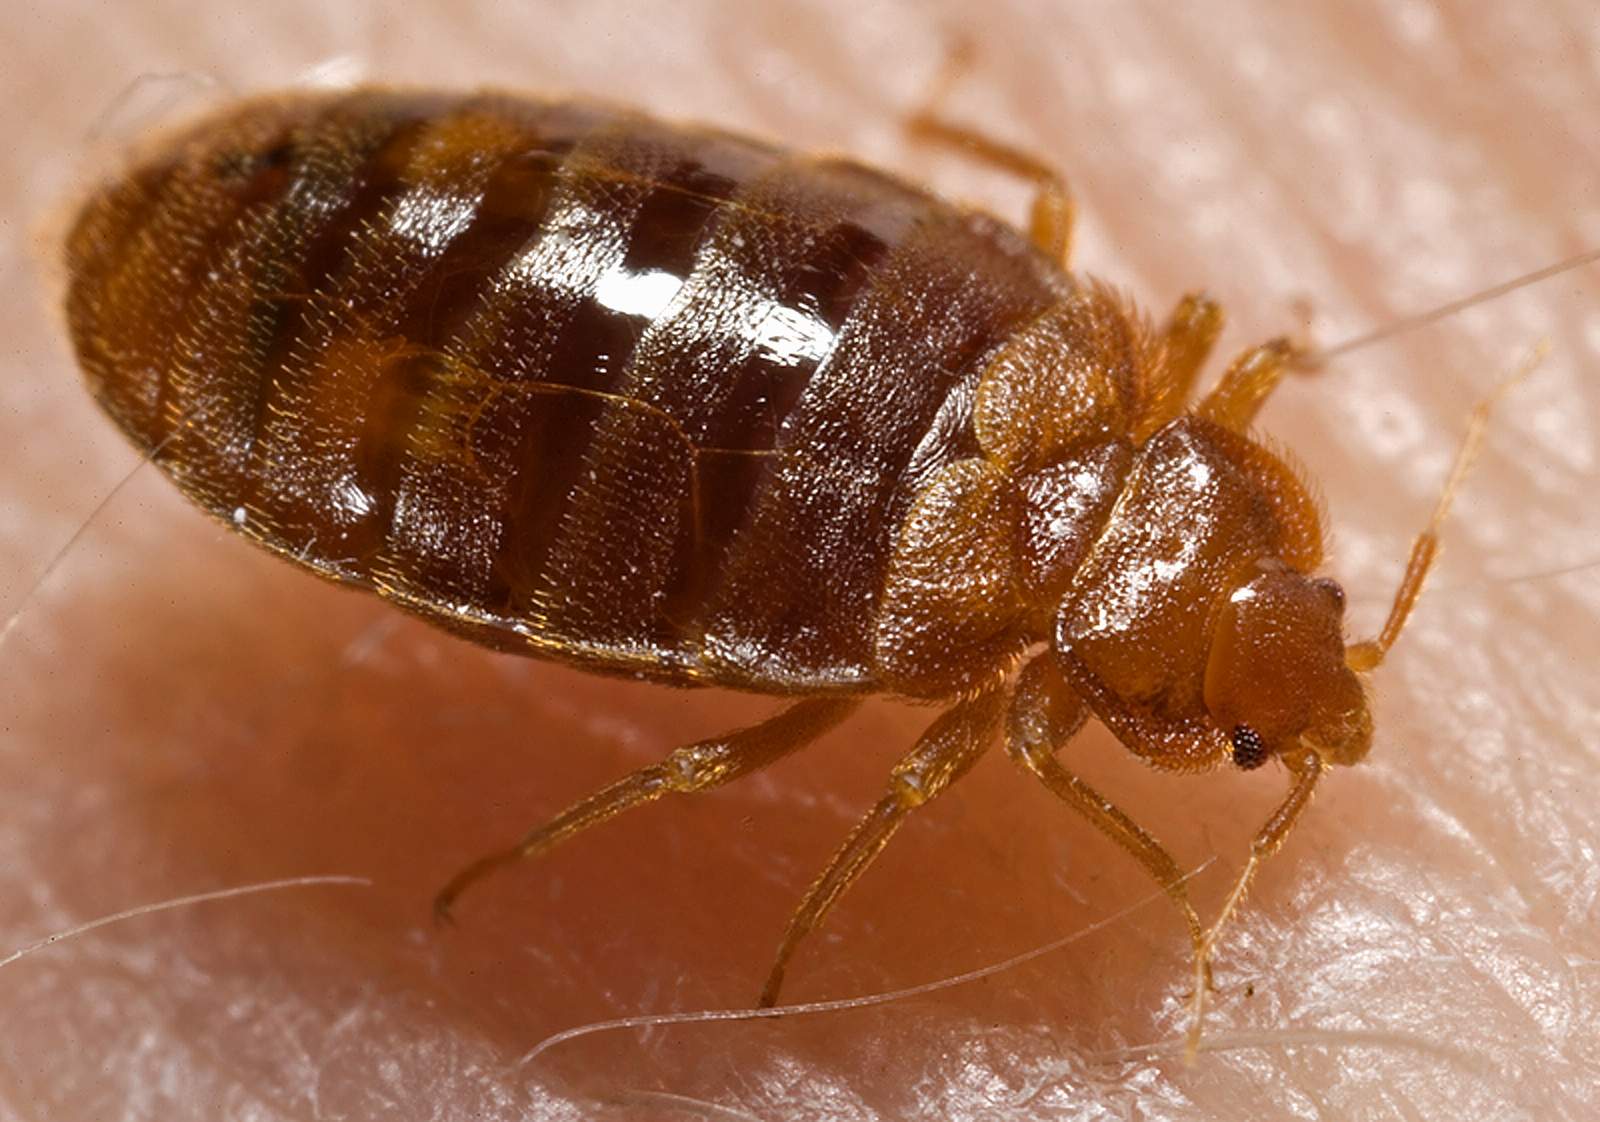 Record numbers of bedbugs in Denmark